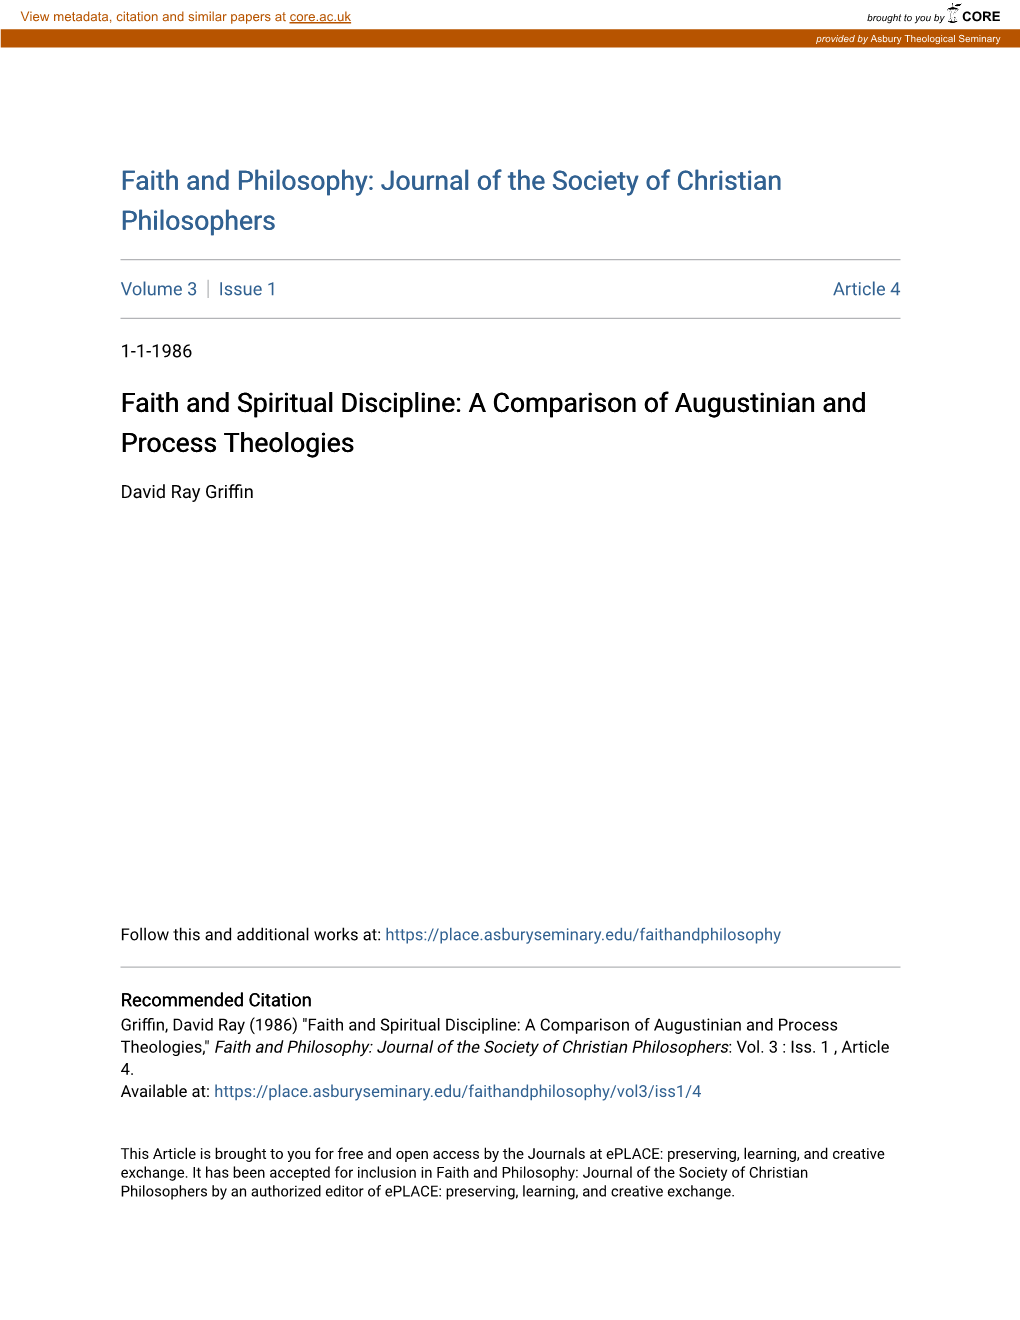 Faith and Spiritual Discipline: a Comparison of Augustinian and Process Theologies